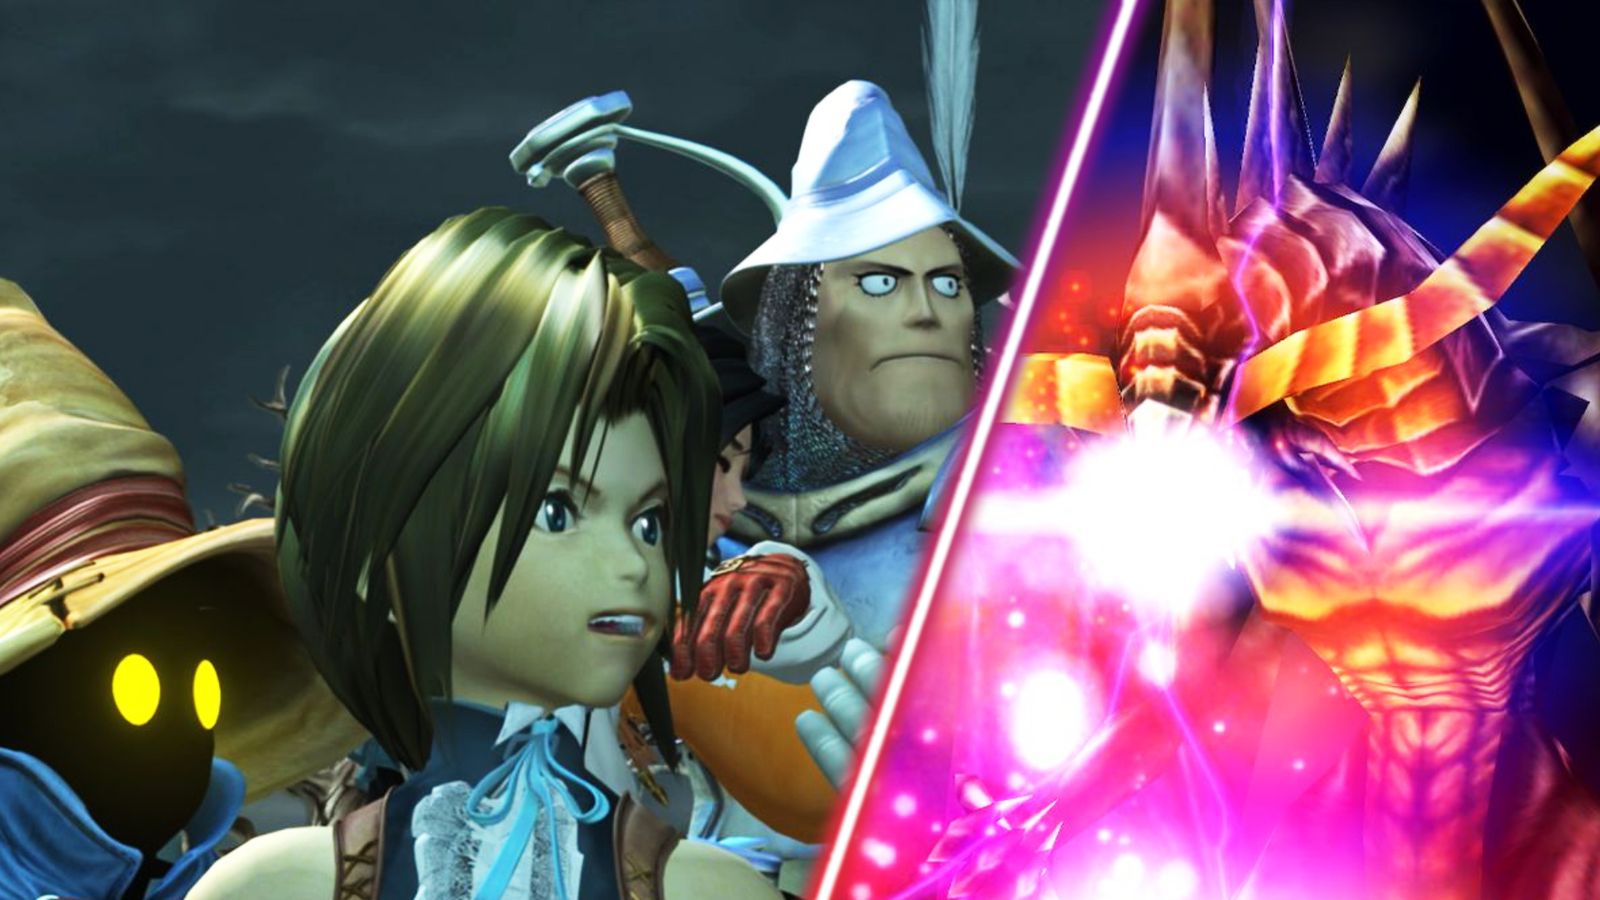 Some characters from Final Fantasy 9.